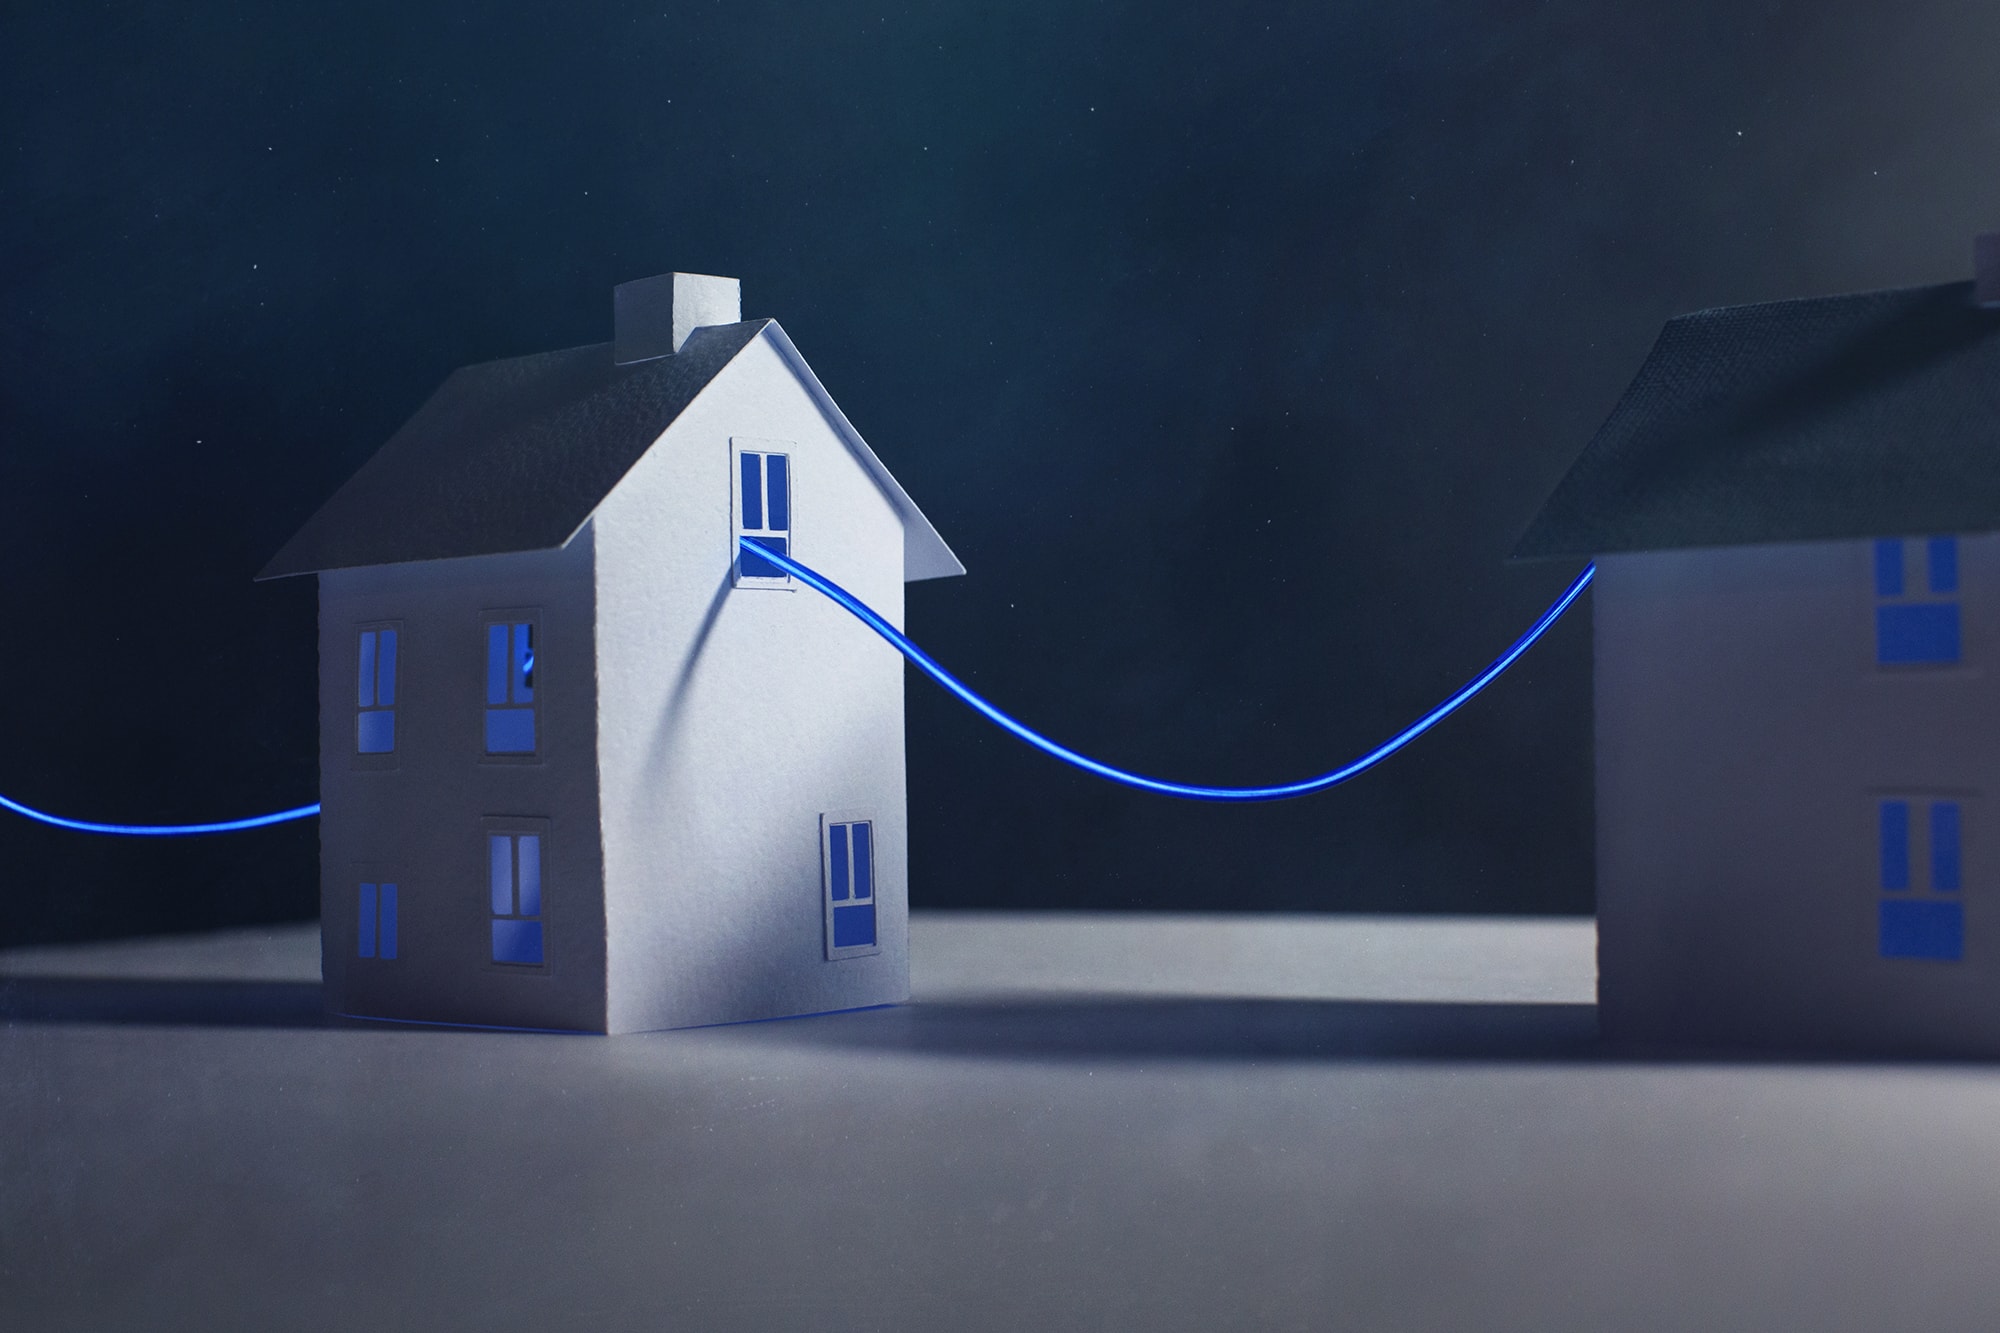 A neon cable travels from one paper home to the next